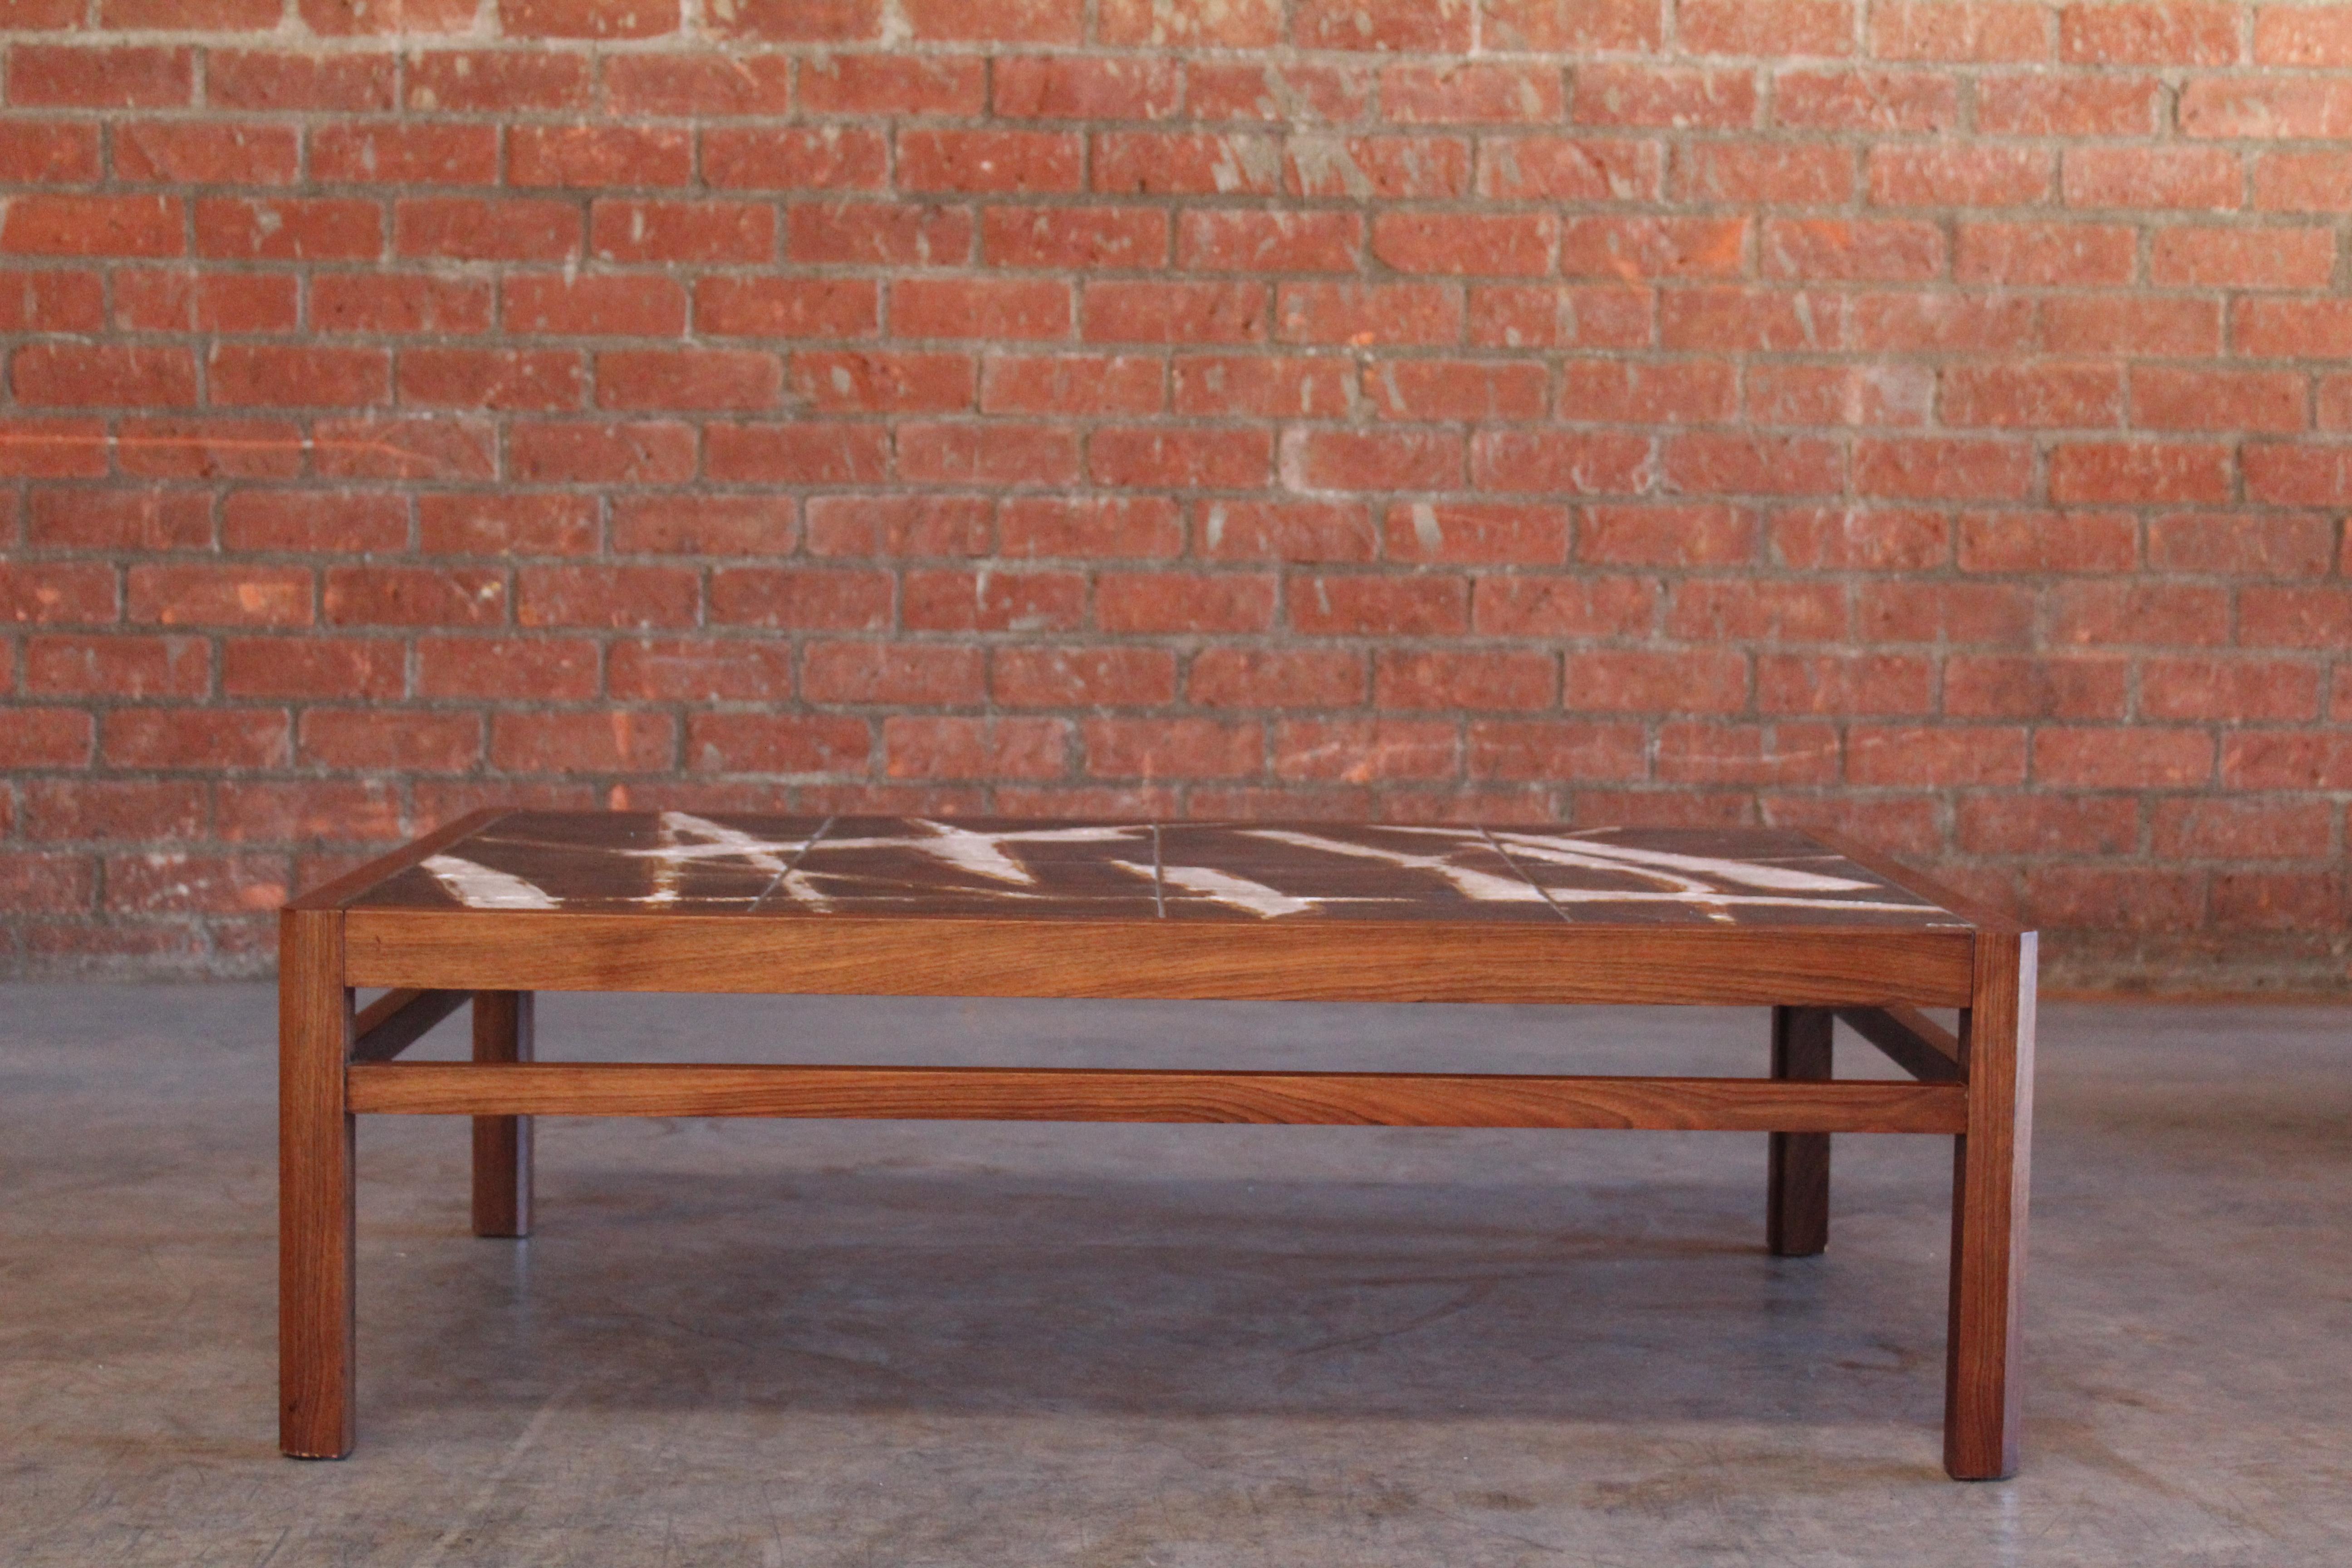 Mid-Century Modern Danish Rosewood and Ceramic Tile Coffee Table by Ole Bjorn Krüger, 1960s For Sale